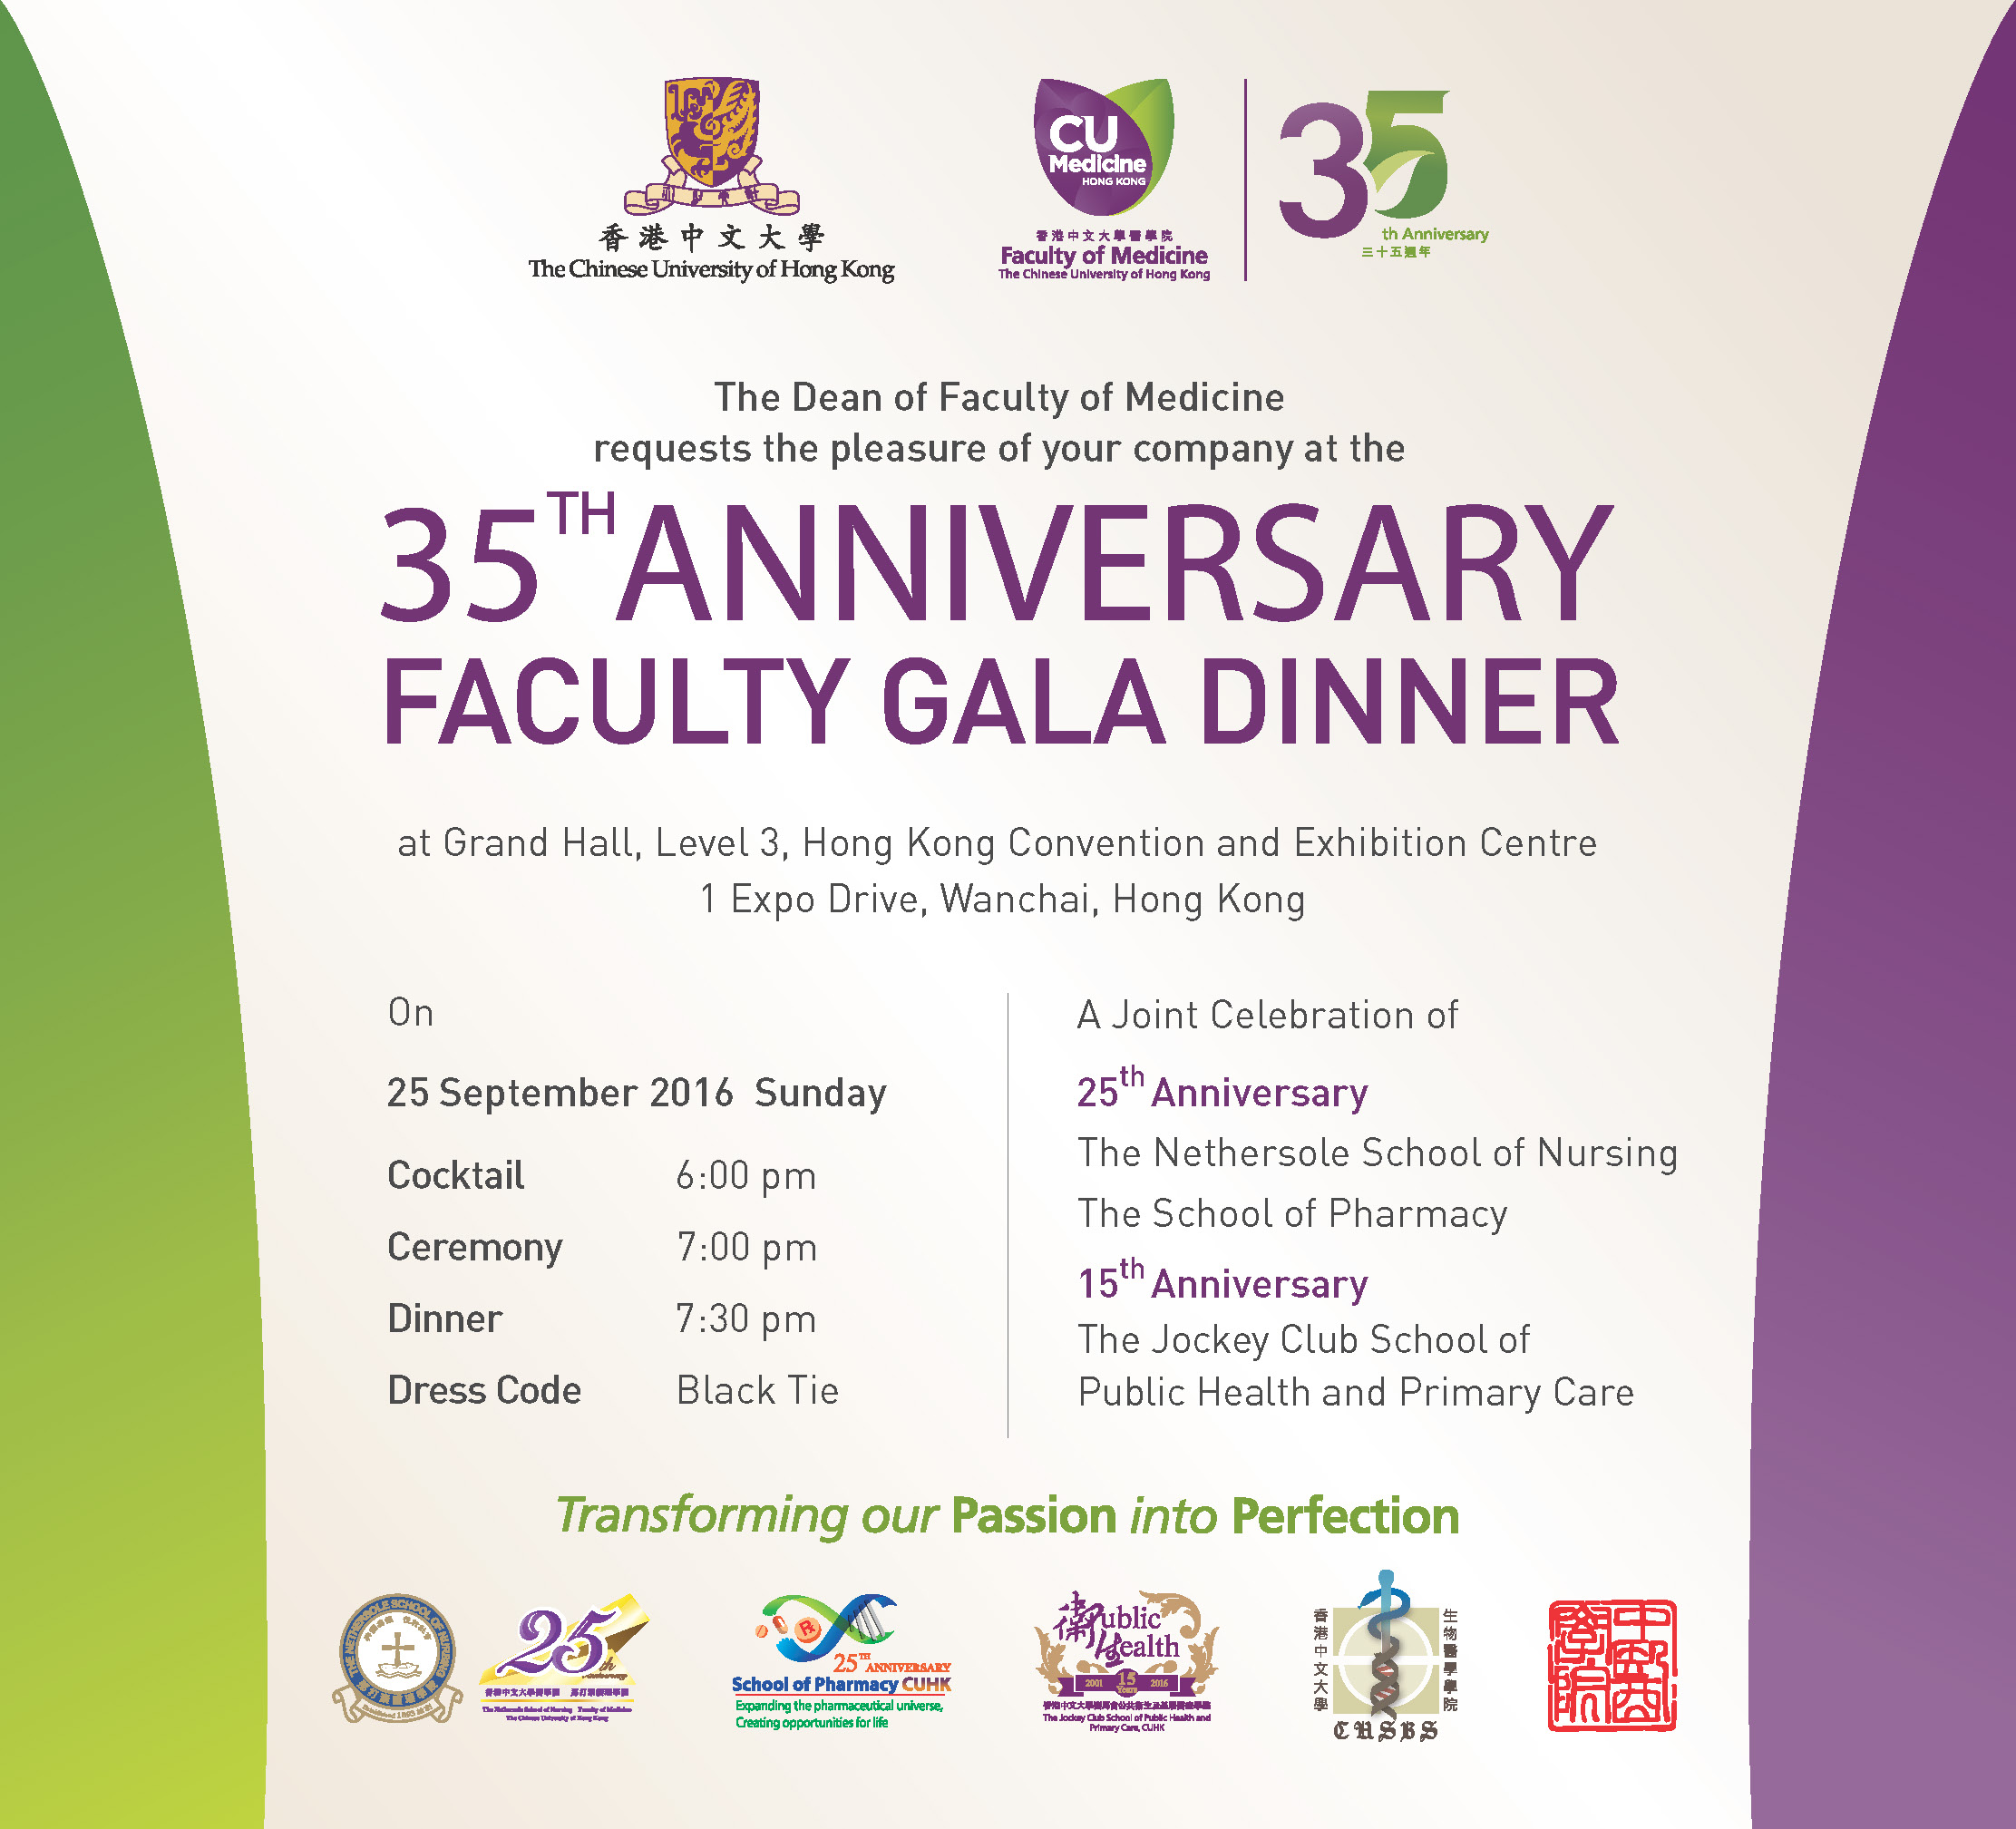 35th Anniversary Faculty Gala Dinner @ Grand Hall, Level 3, Hong Kong Convention and Exhibition Centre 